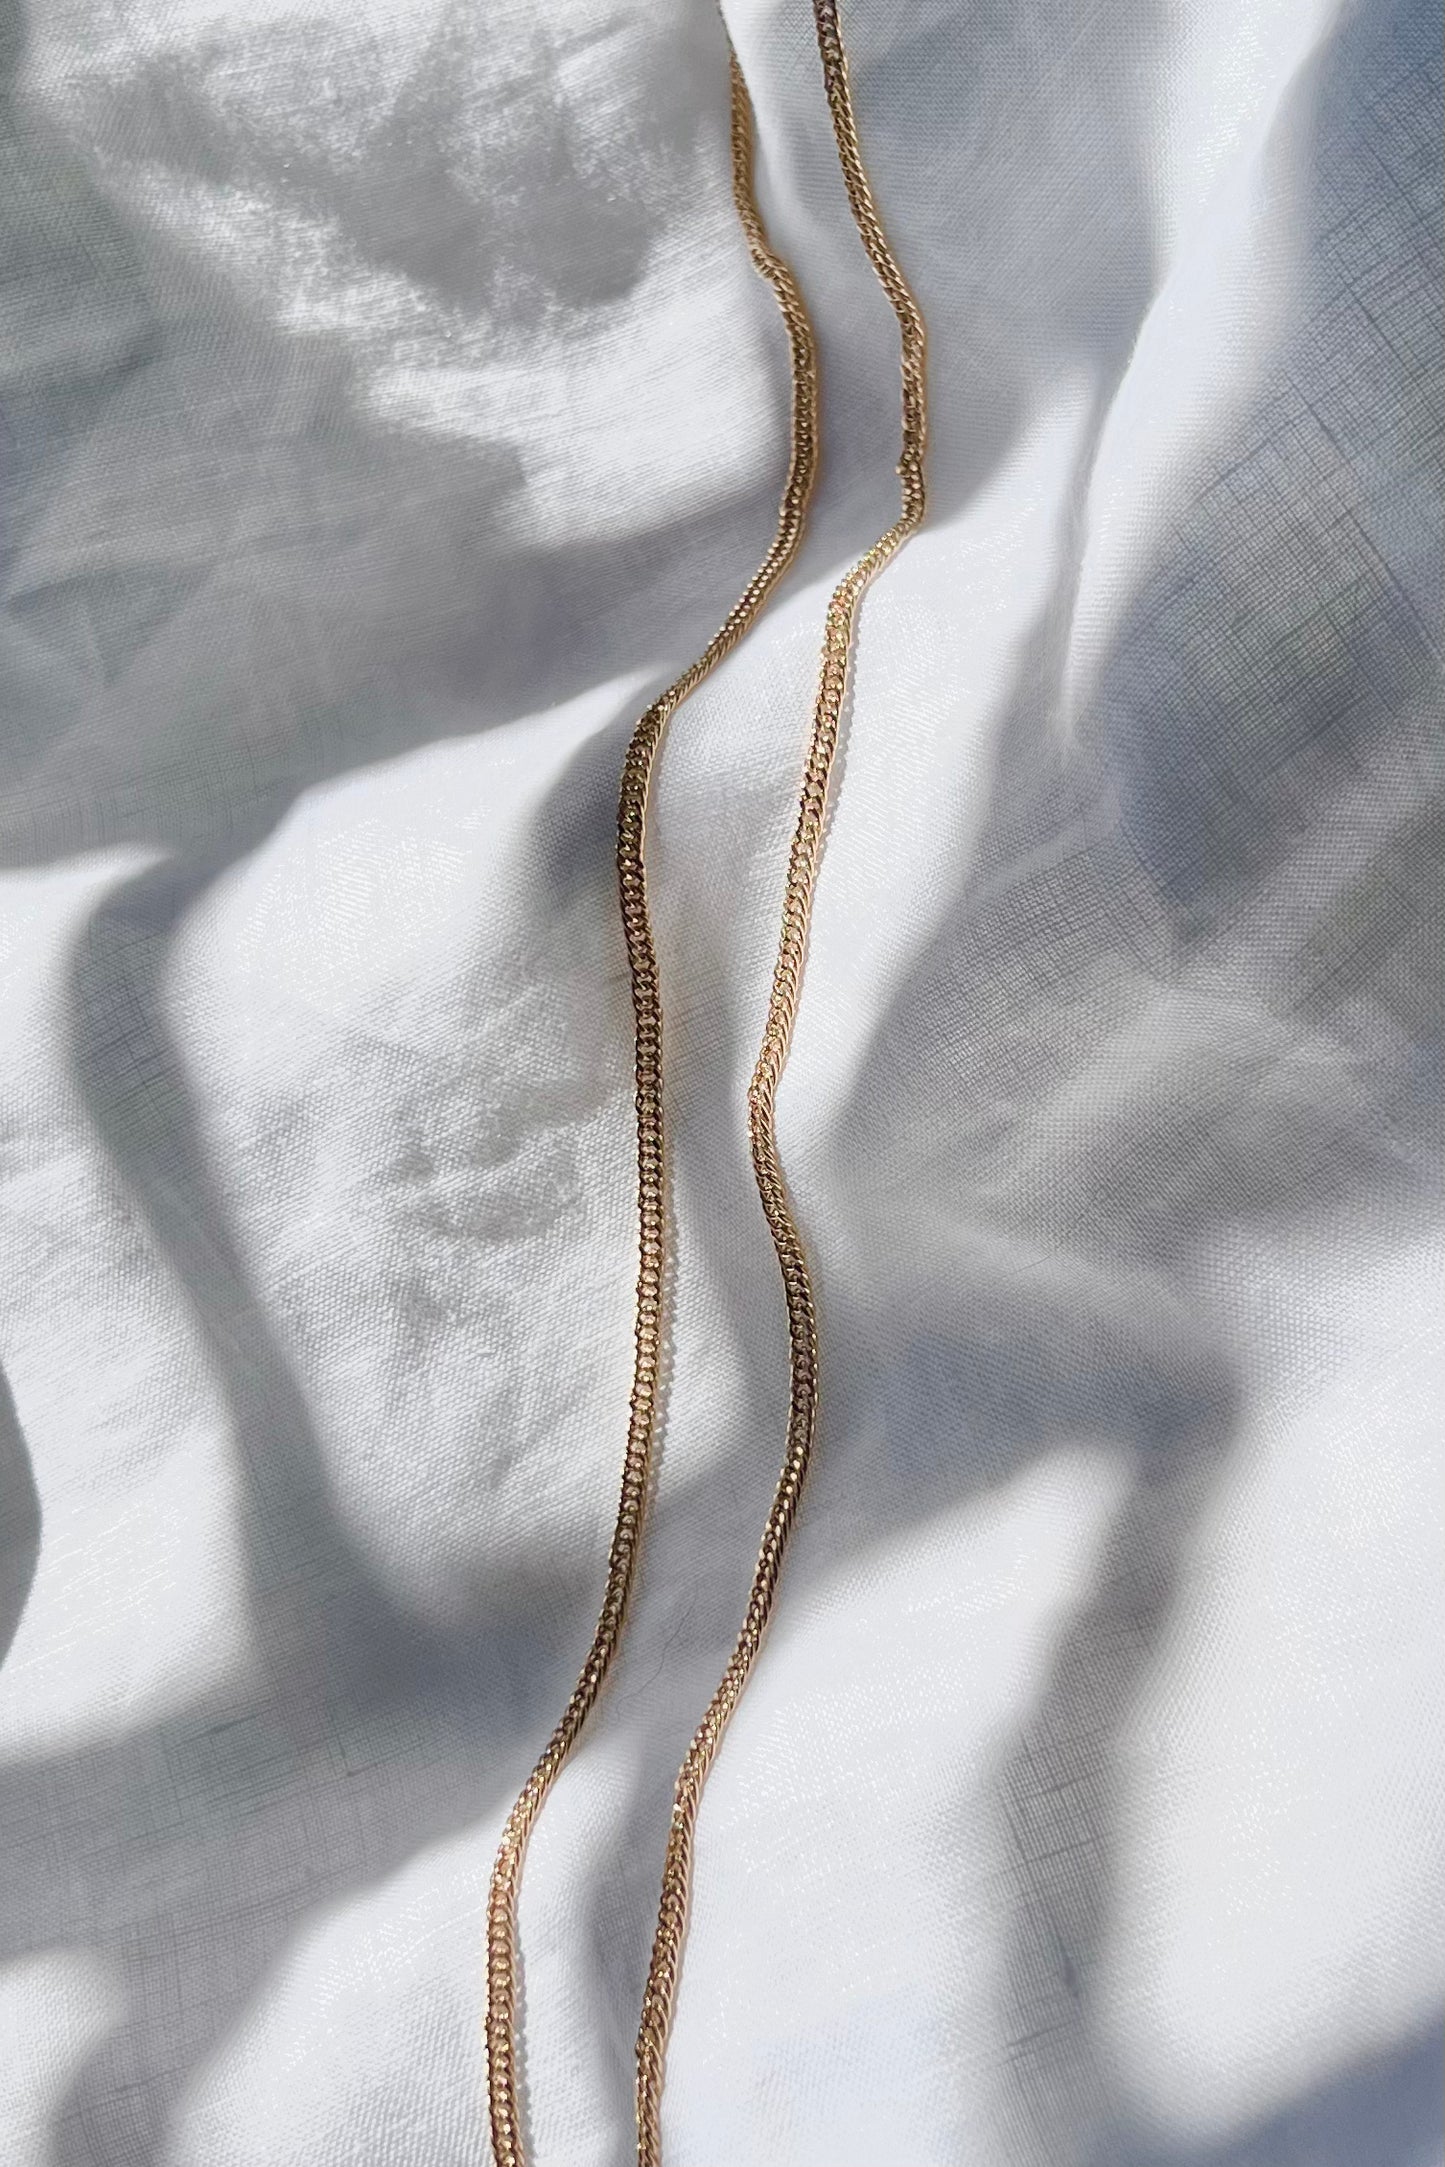 Gold Curb Chain Necklace beautifully draped on a linen surface, elegantly following the curves of the linen folds.